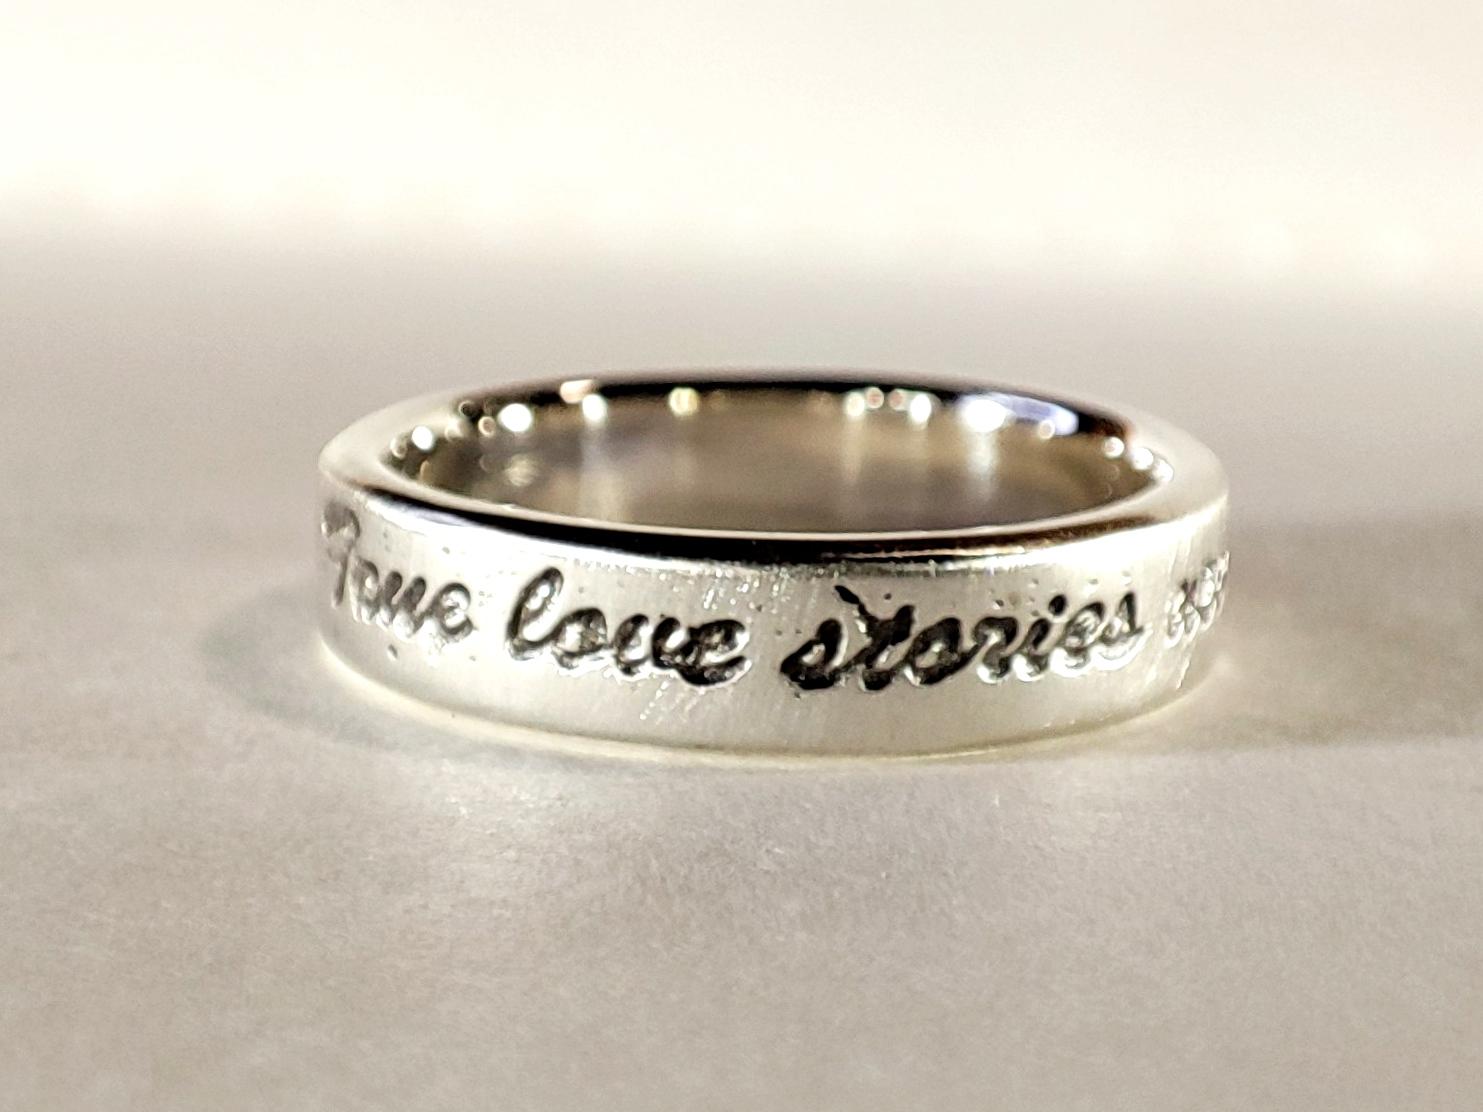 Love Stories Ring, Wide Band Ring with Verse Around the circumference